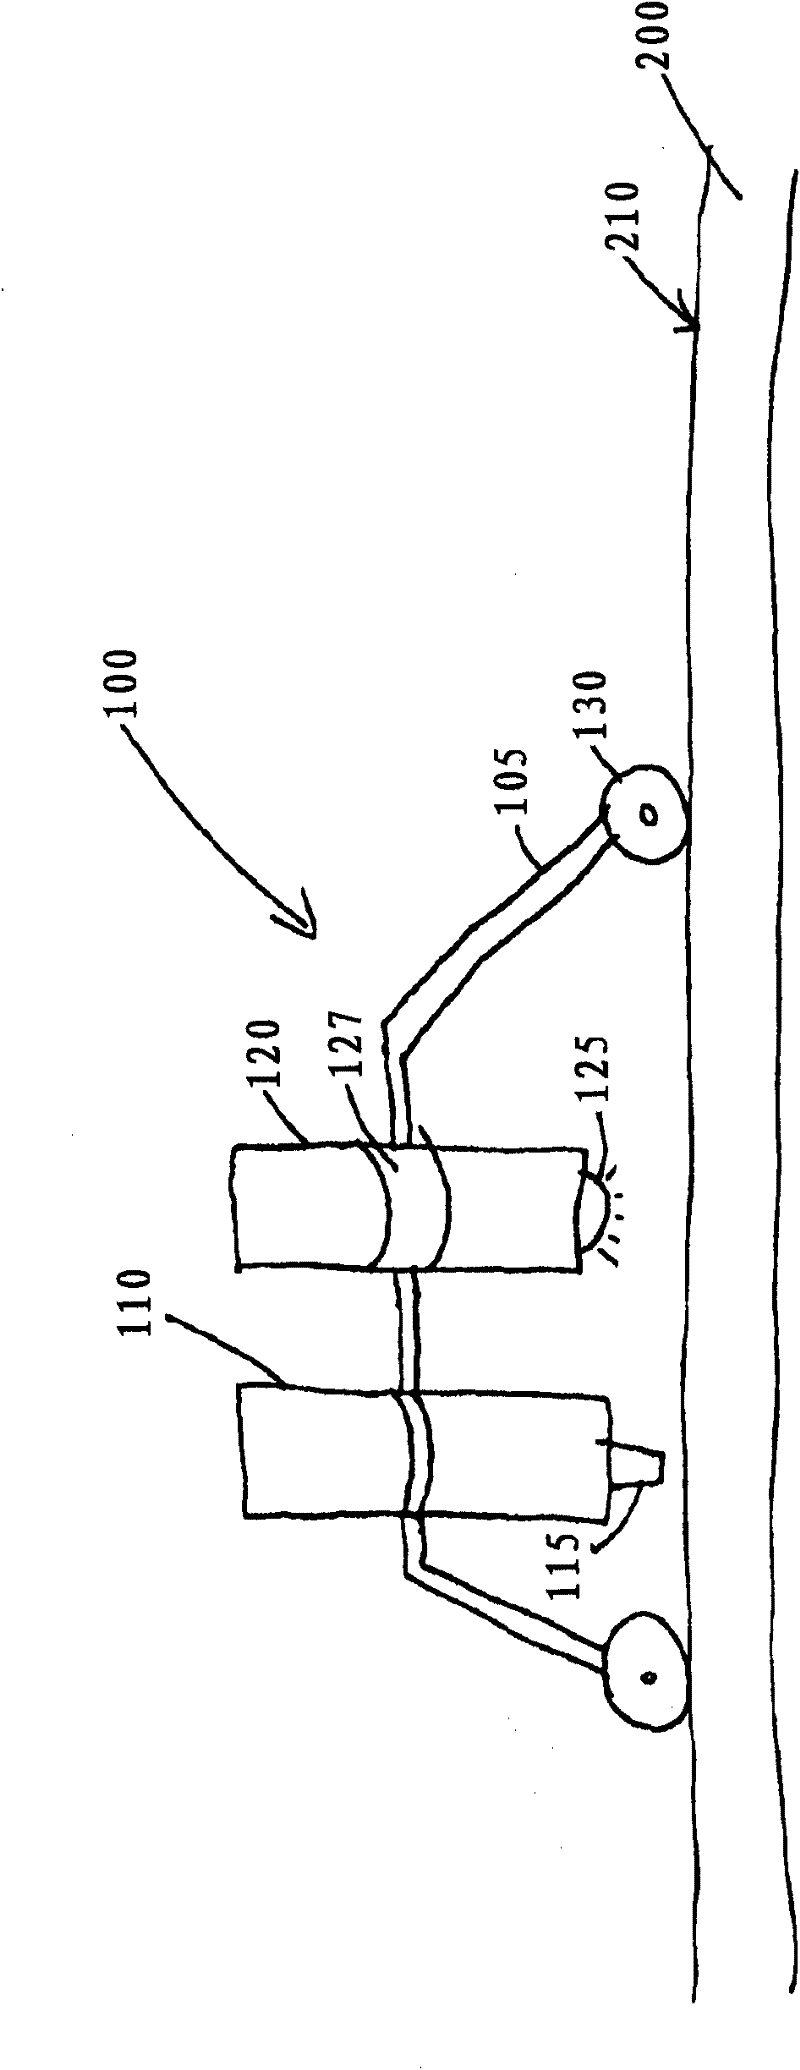 Uvv curable coating compositions and method for coating flooring and other substrates with same